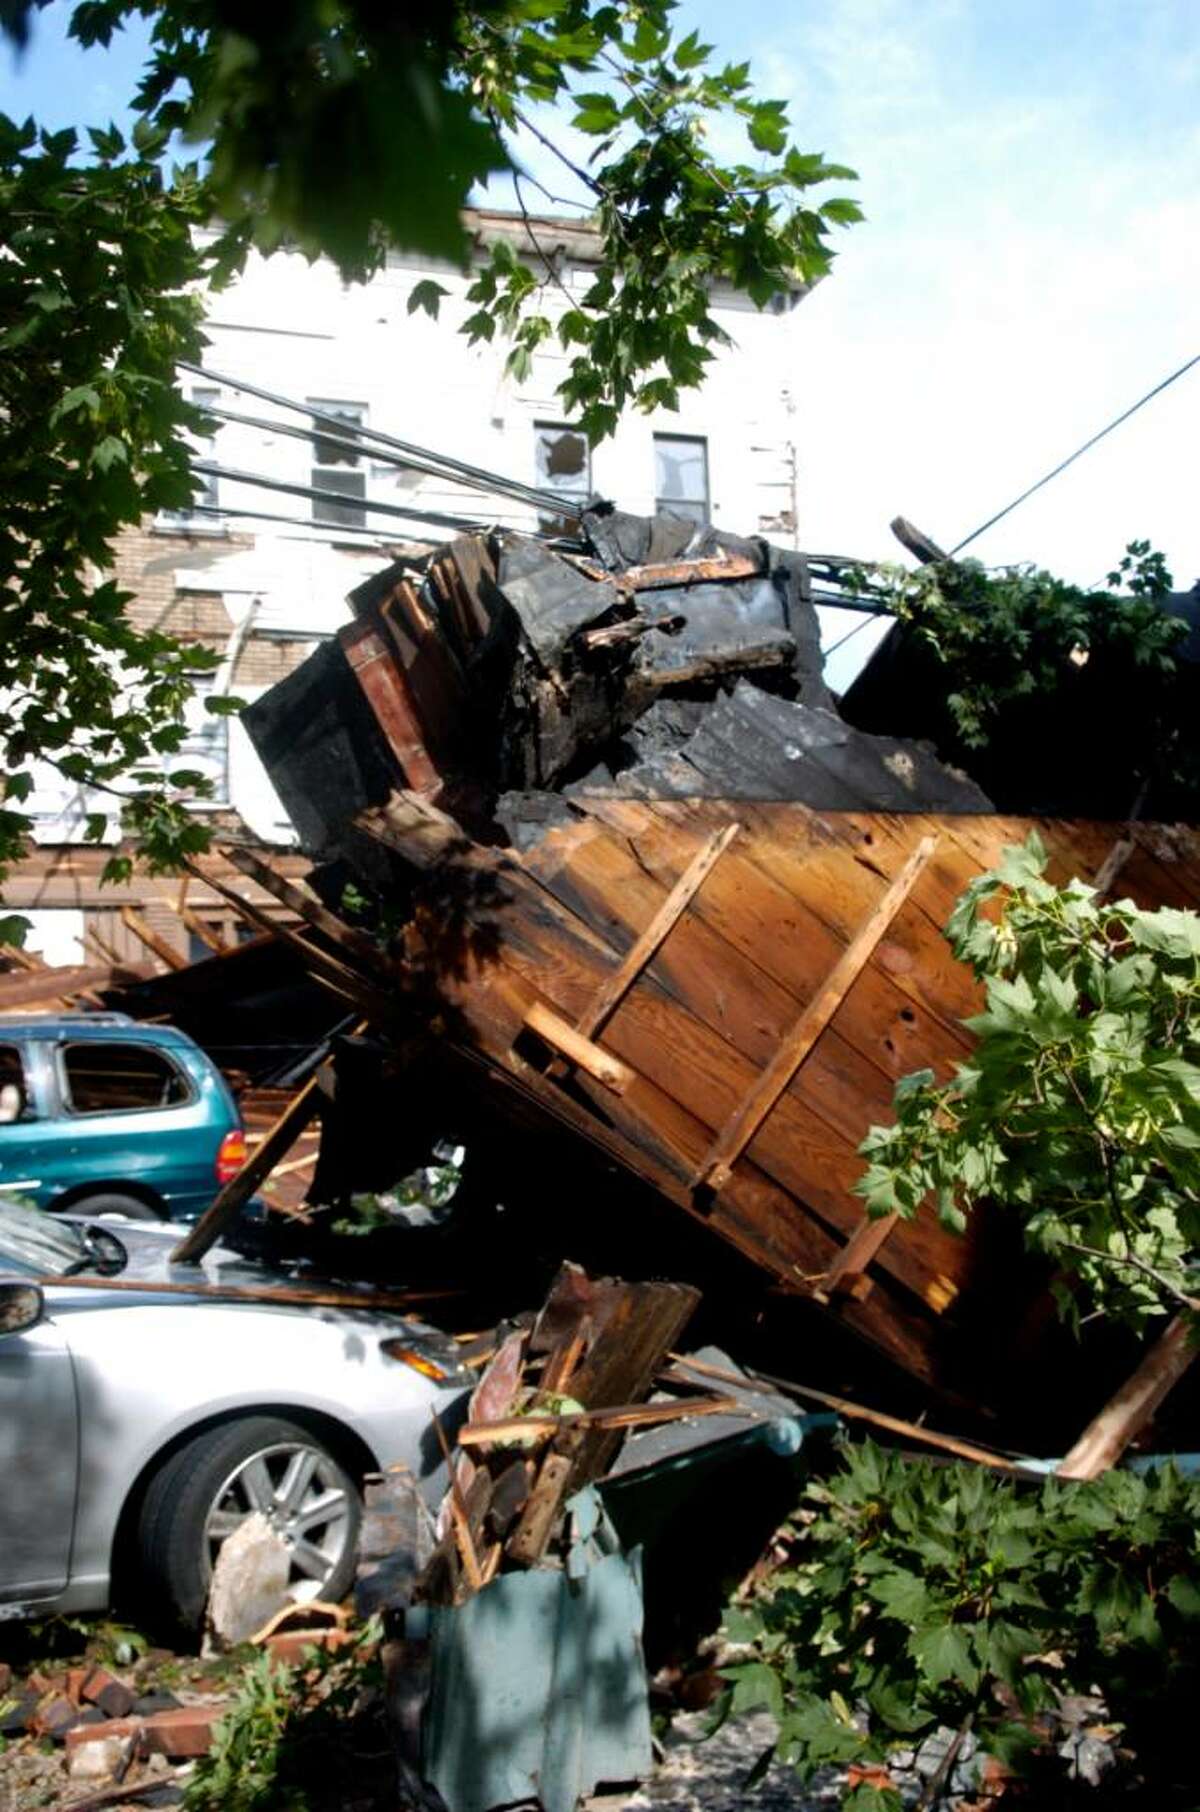 Pieces of the facade of a building on East Main Street in Bridgeport lay across cars and power lines after a storm tore through the area Thursday, June 24, 2010.